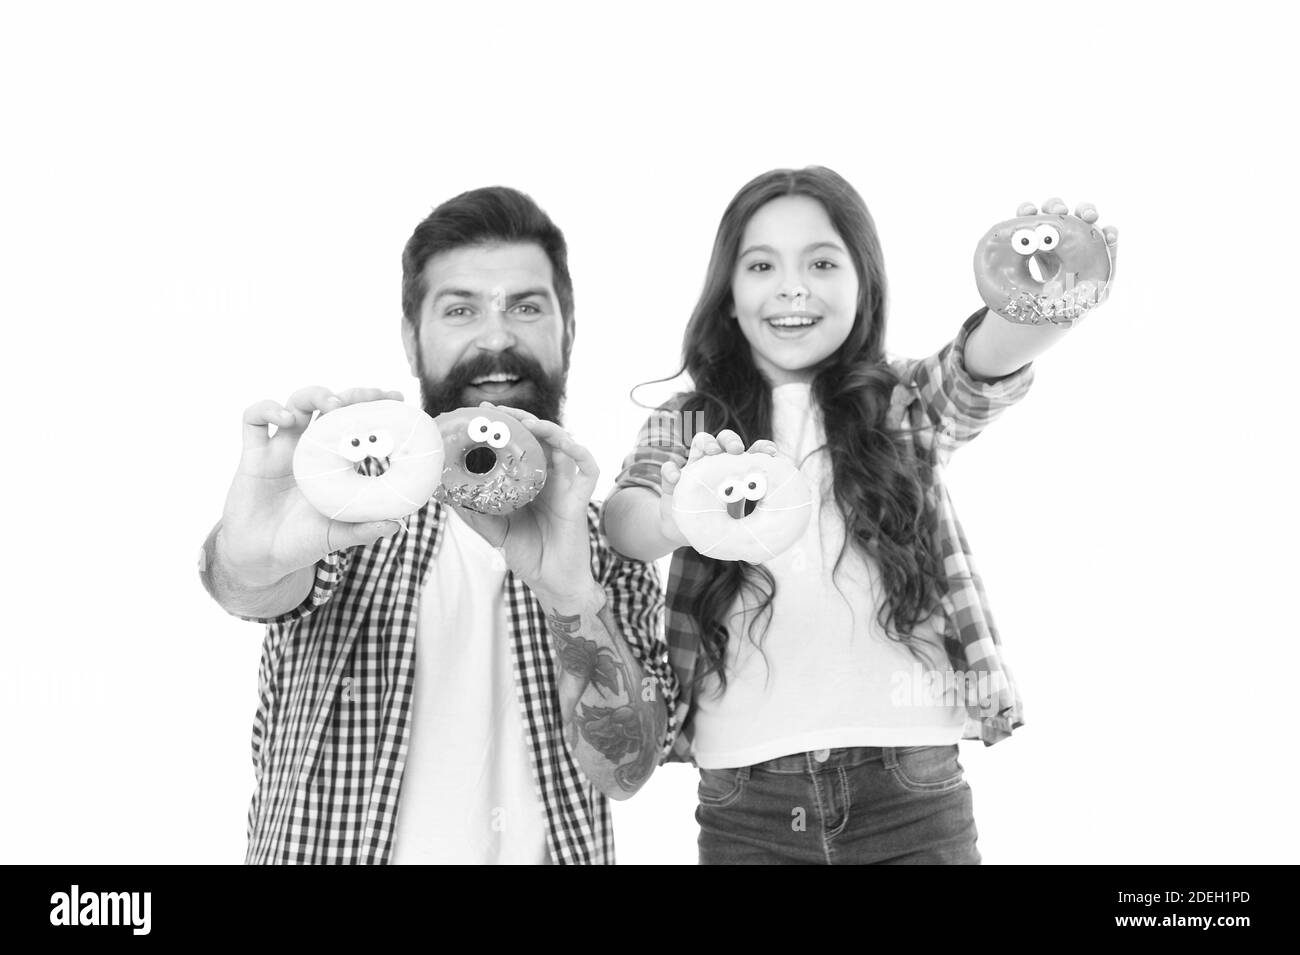 Sweet tooth. Girl child and dad hold glazed donuts. Cheerful family. Sweets and treats concept. Daughter and father eat sweet donuts. Happiness and joy. Buy more sweets. Family bakery. Bakery shop. Stock Photo